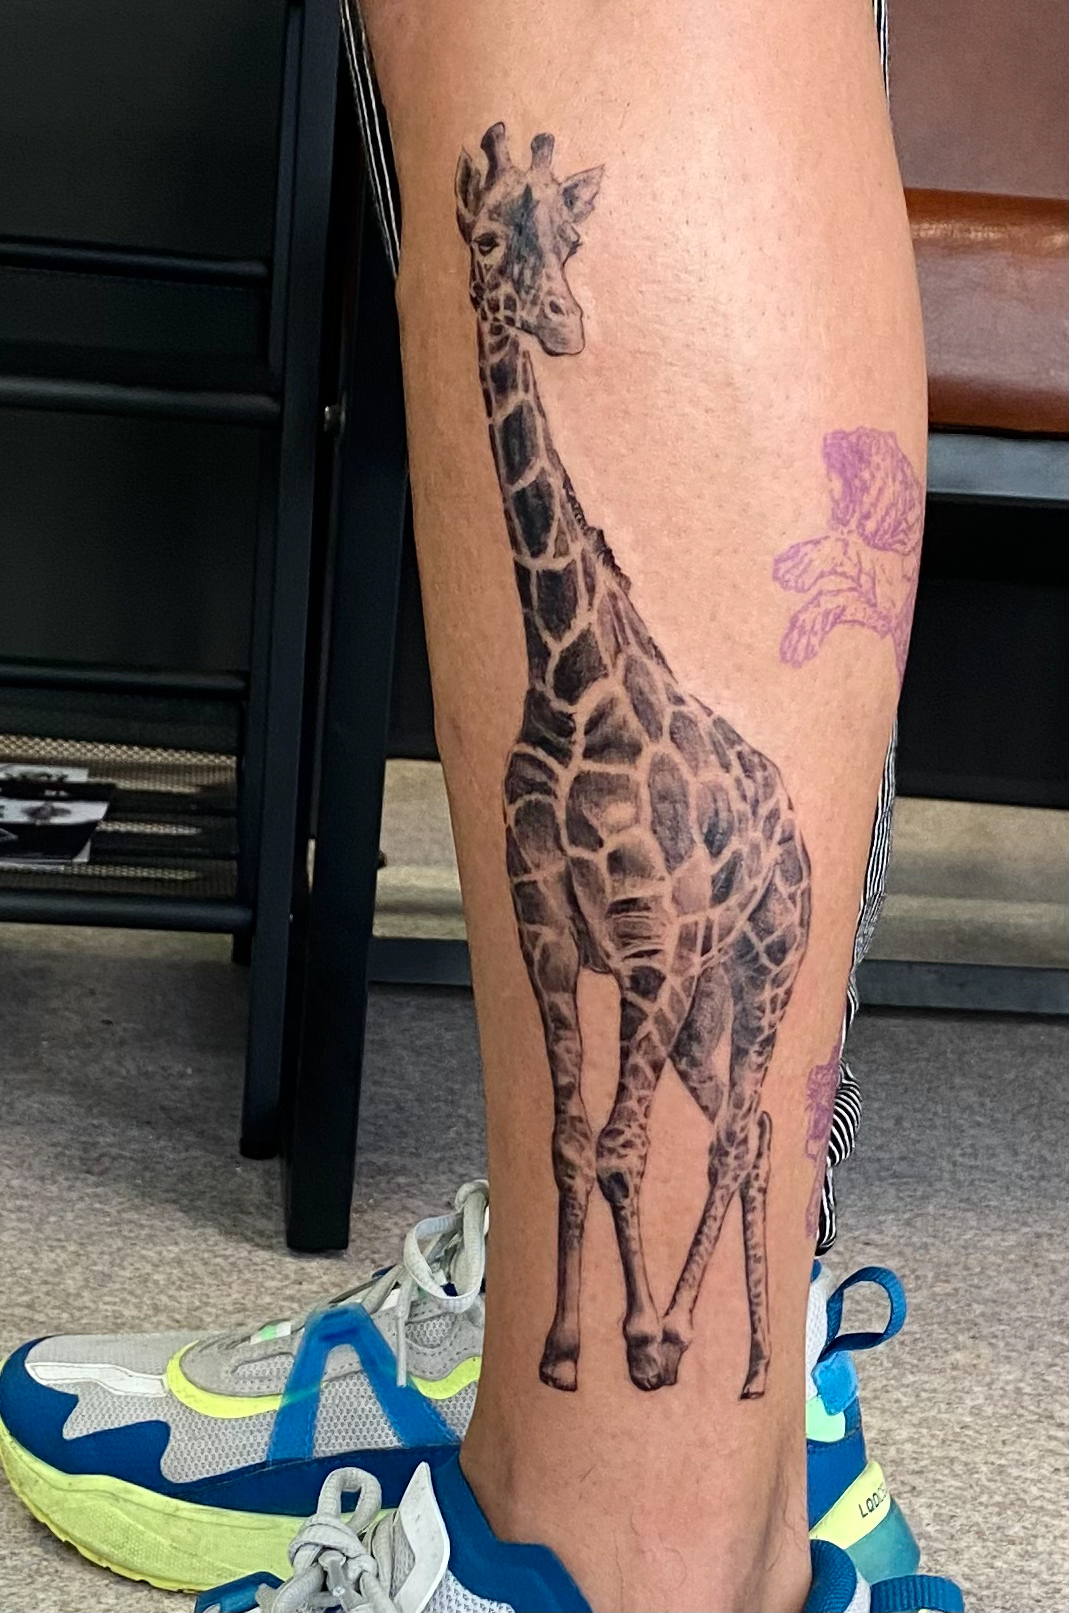 Connect-The-Dots Giraffe Tattoo » Funny, Bizarre, Amazing Pictures & Videos